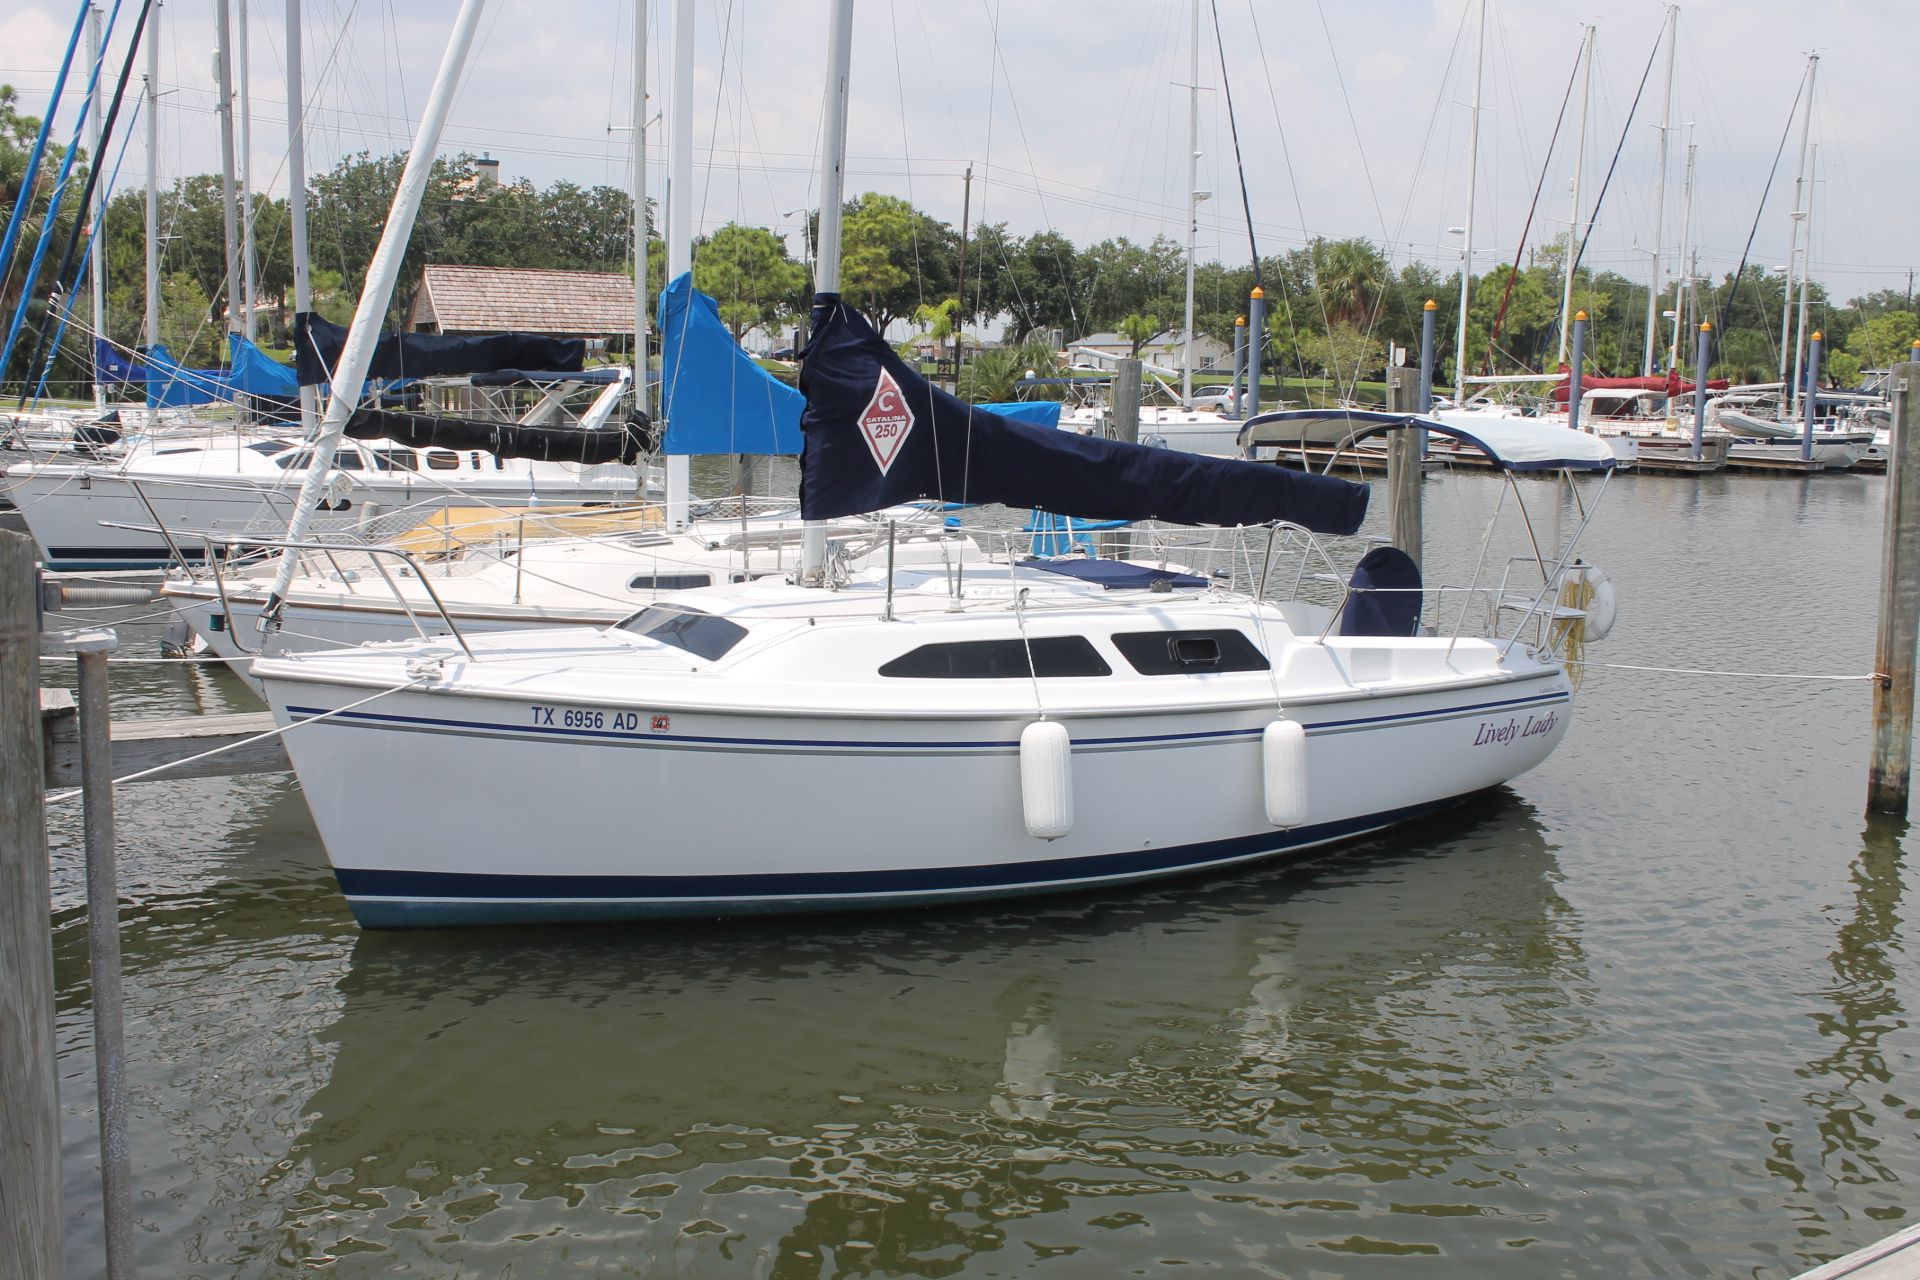 Boats for sale hatteras nc lodging, boat sales near ...